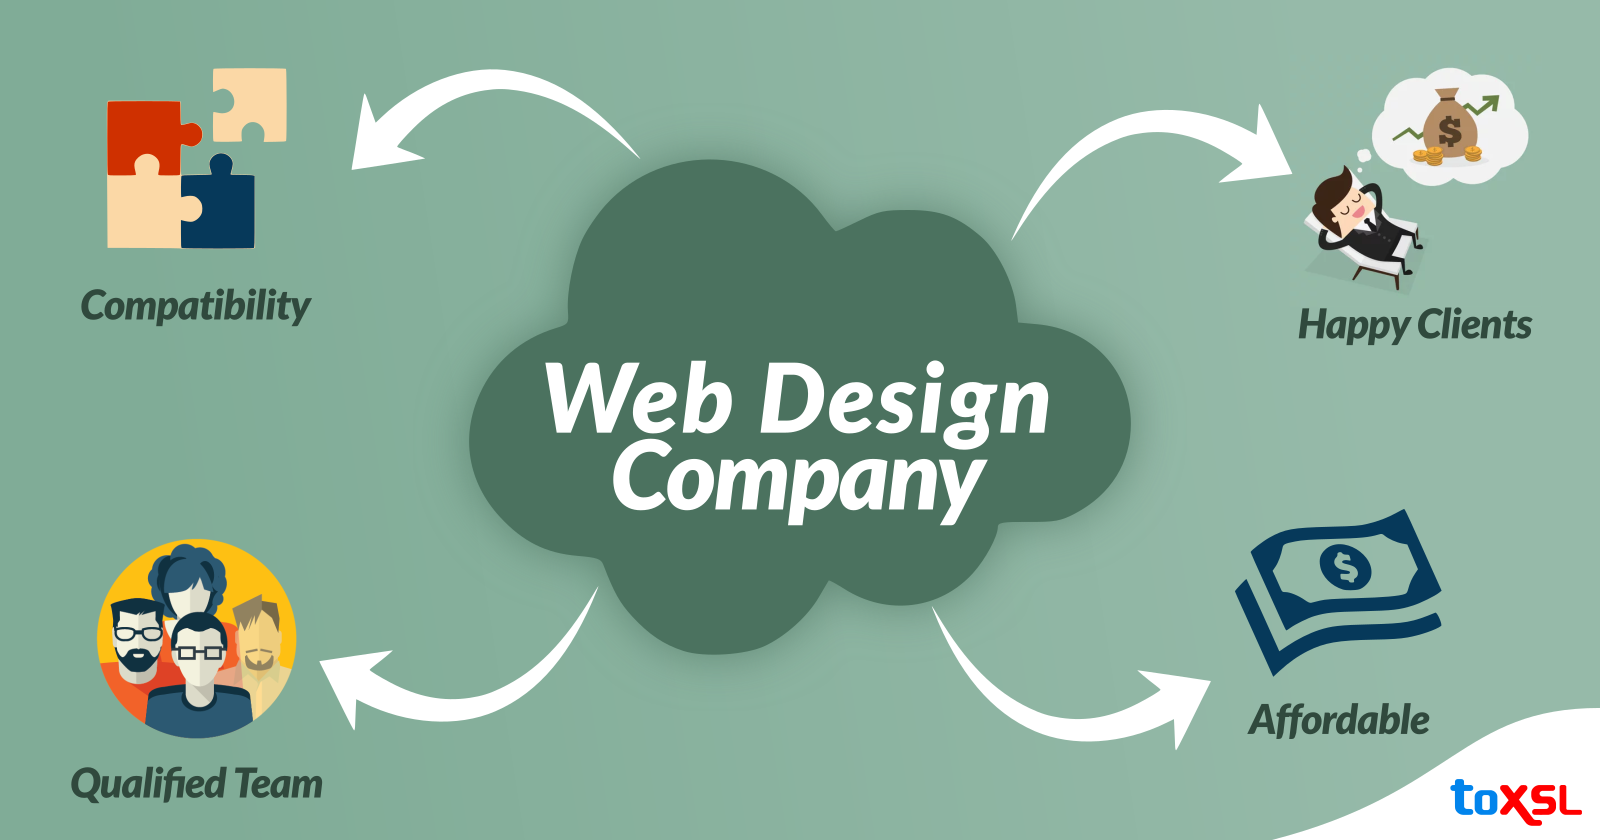 Industry Standards to Consider Before Hiring Web Design Company